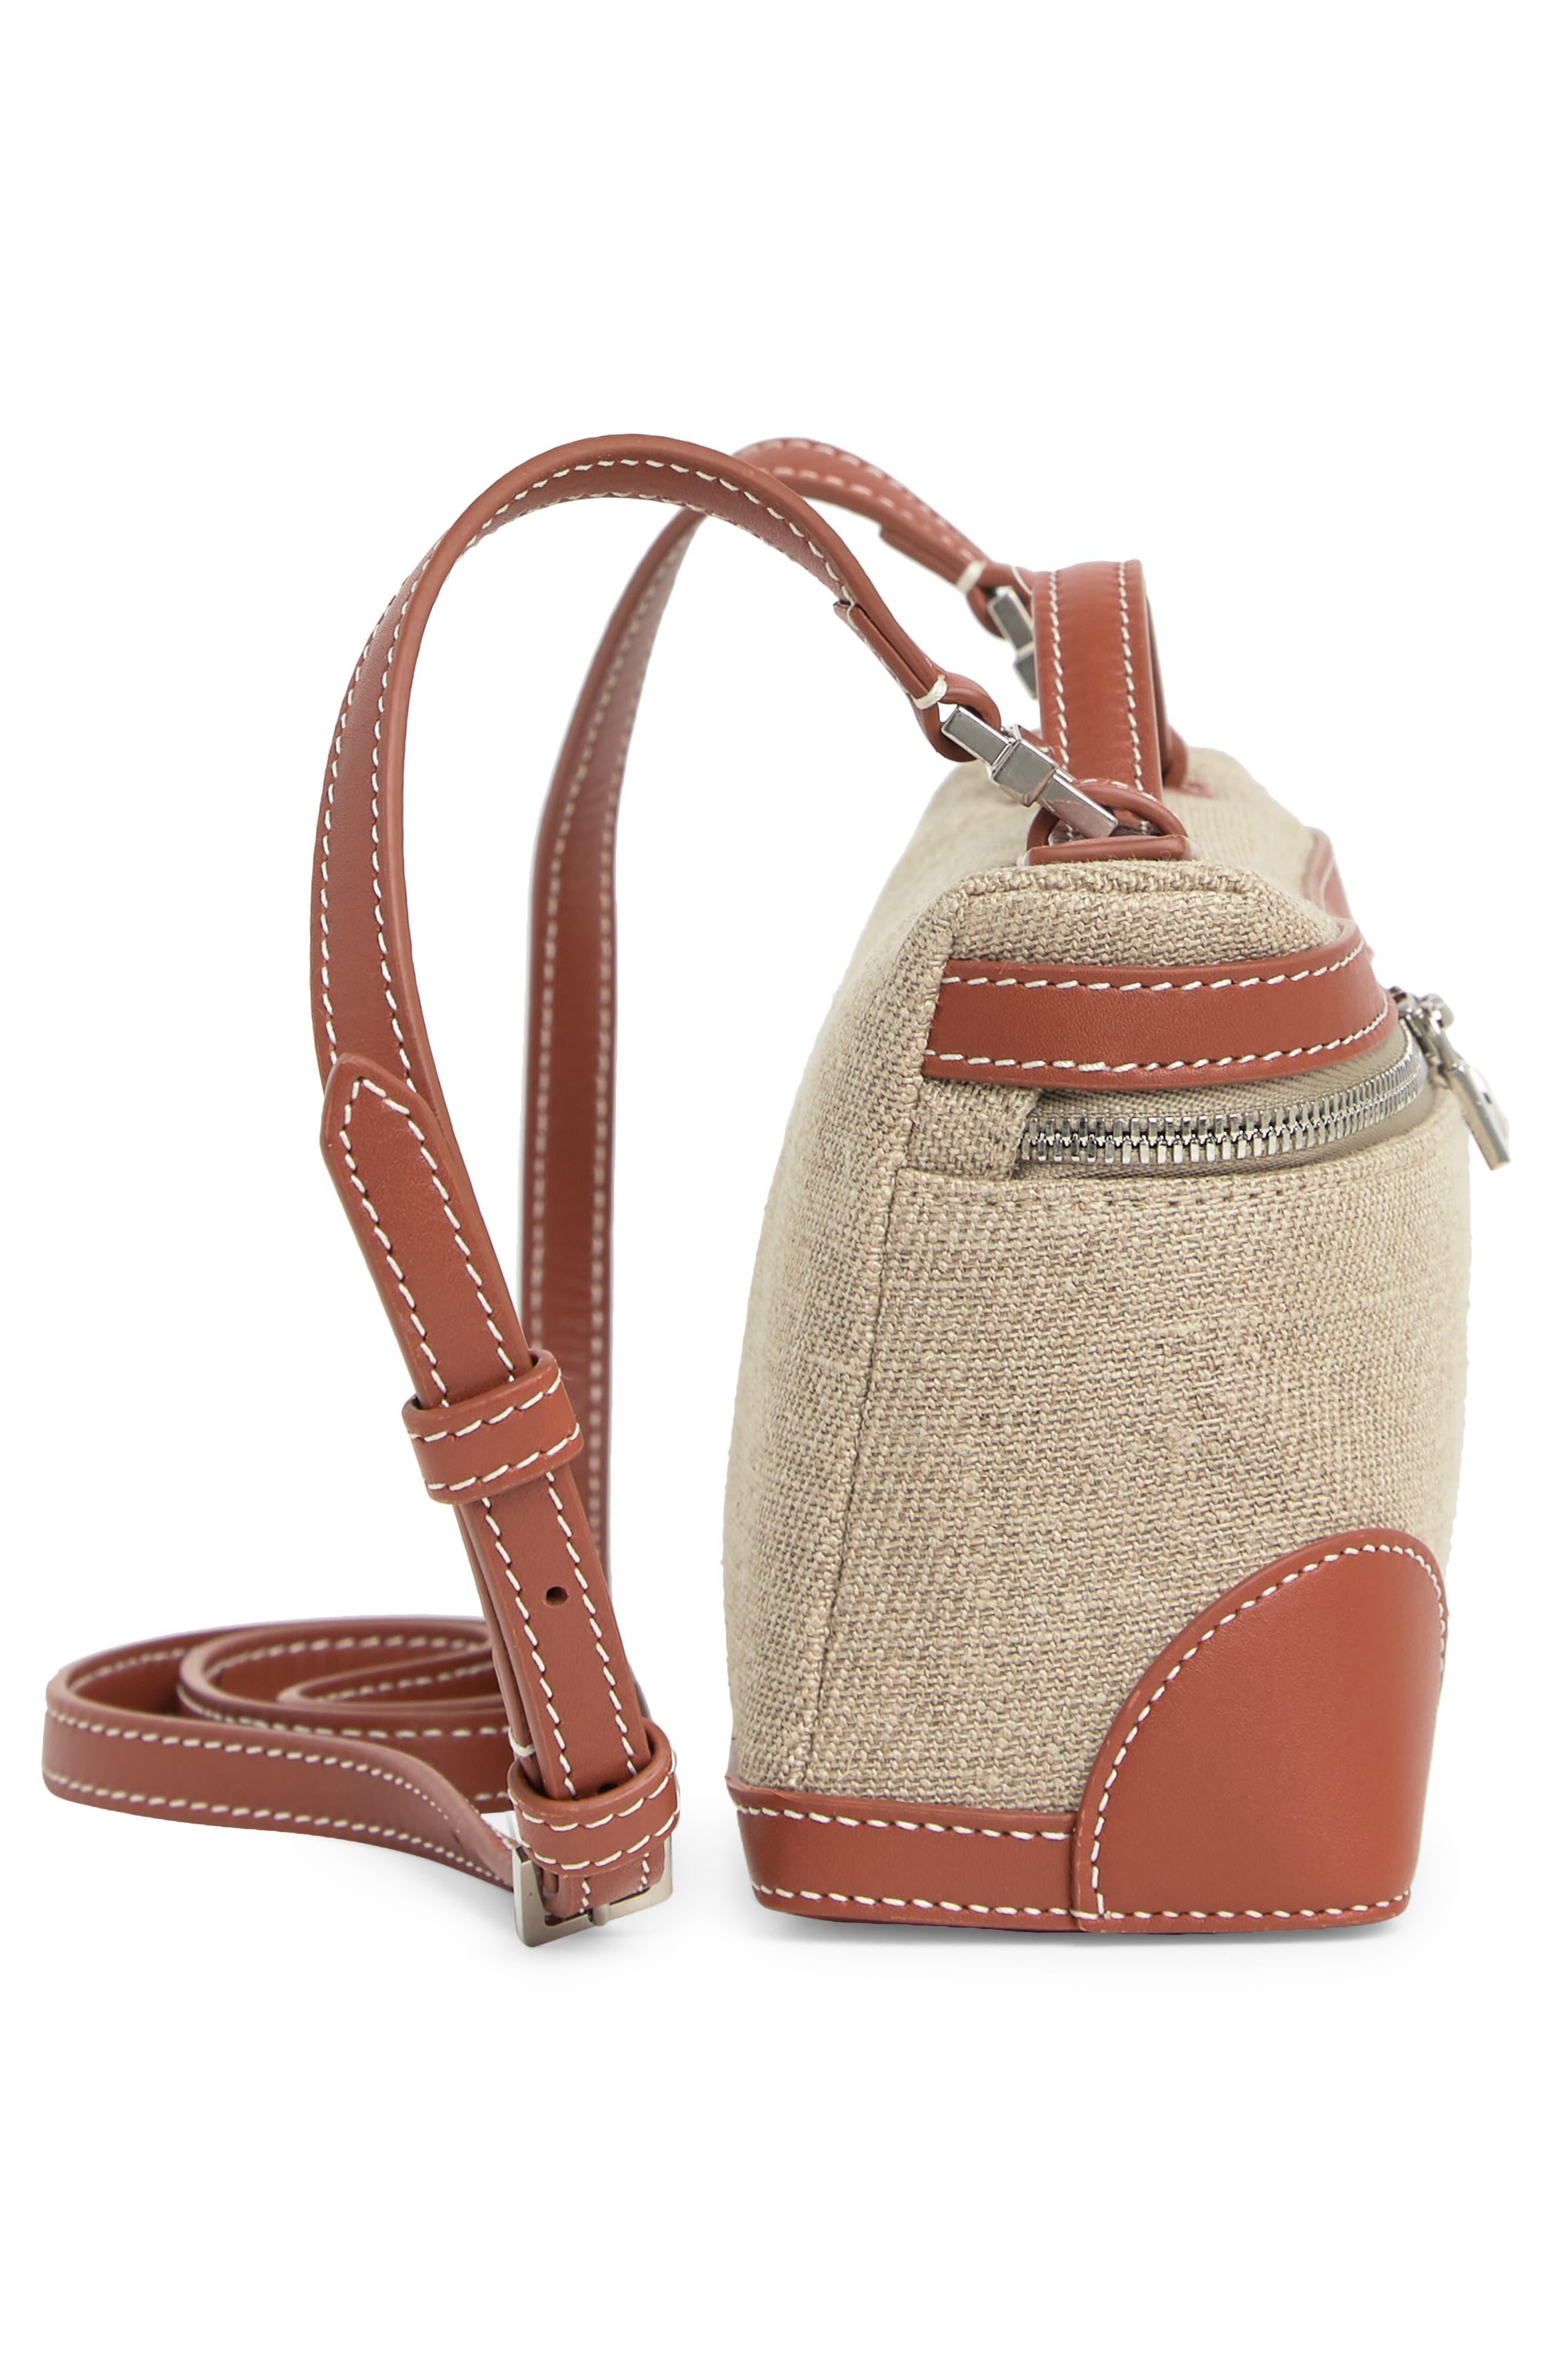 Loro Piana Extra Pocket L19 Wicker Pouch in Natural